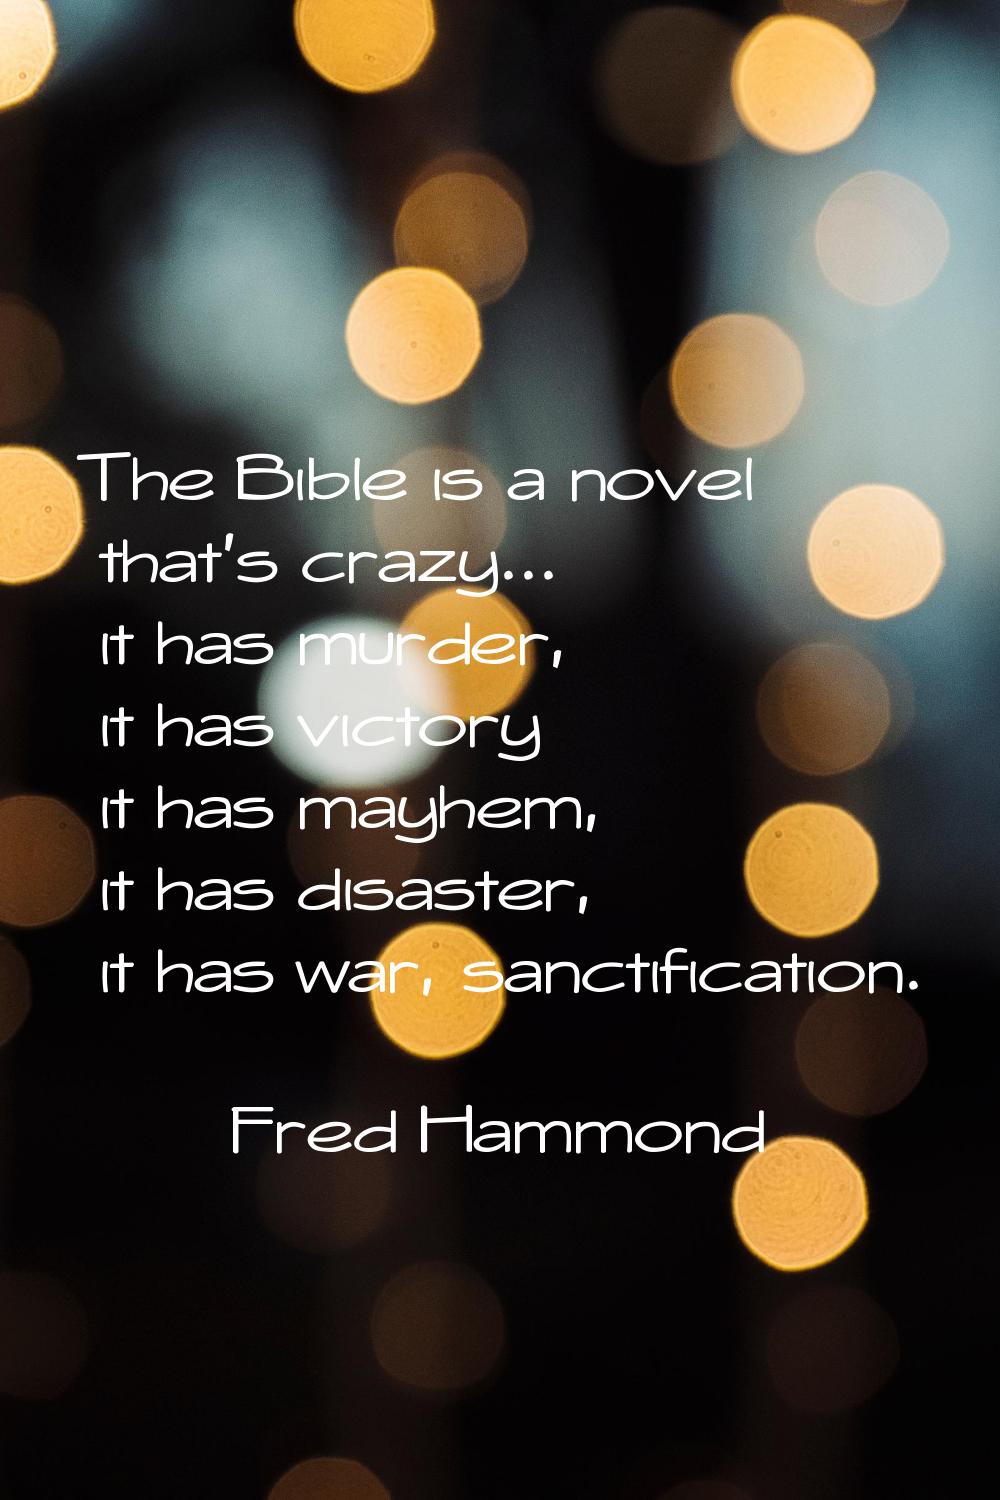 The Bible is a novel that's crazy... it has murder, it has victory it has mayhem, it has disaster, 